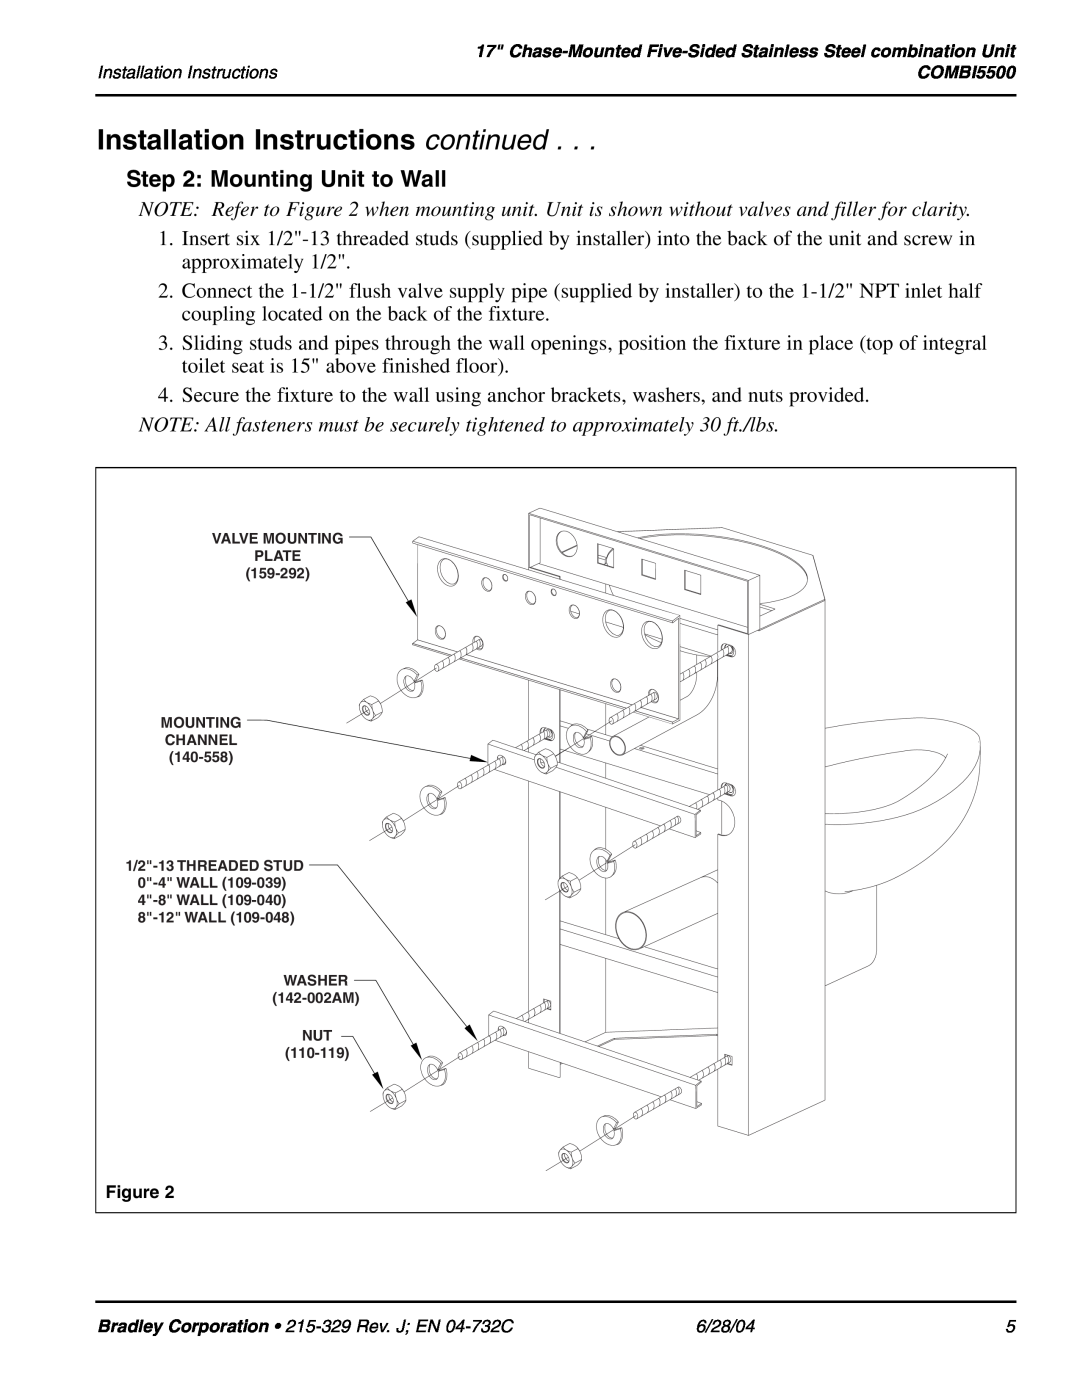 Bradley Brand Furniture COMBI5500 Mounting Unit to Wall, Installation Instructions continued, WASHER 142-002AM NUT 110-119 